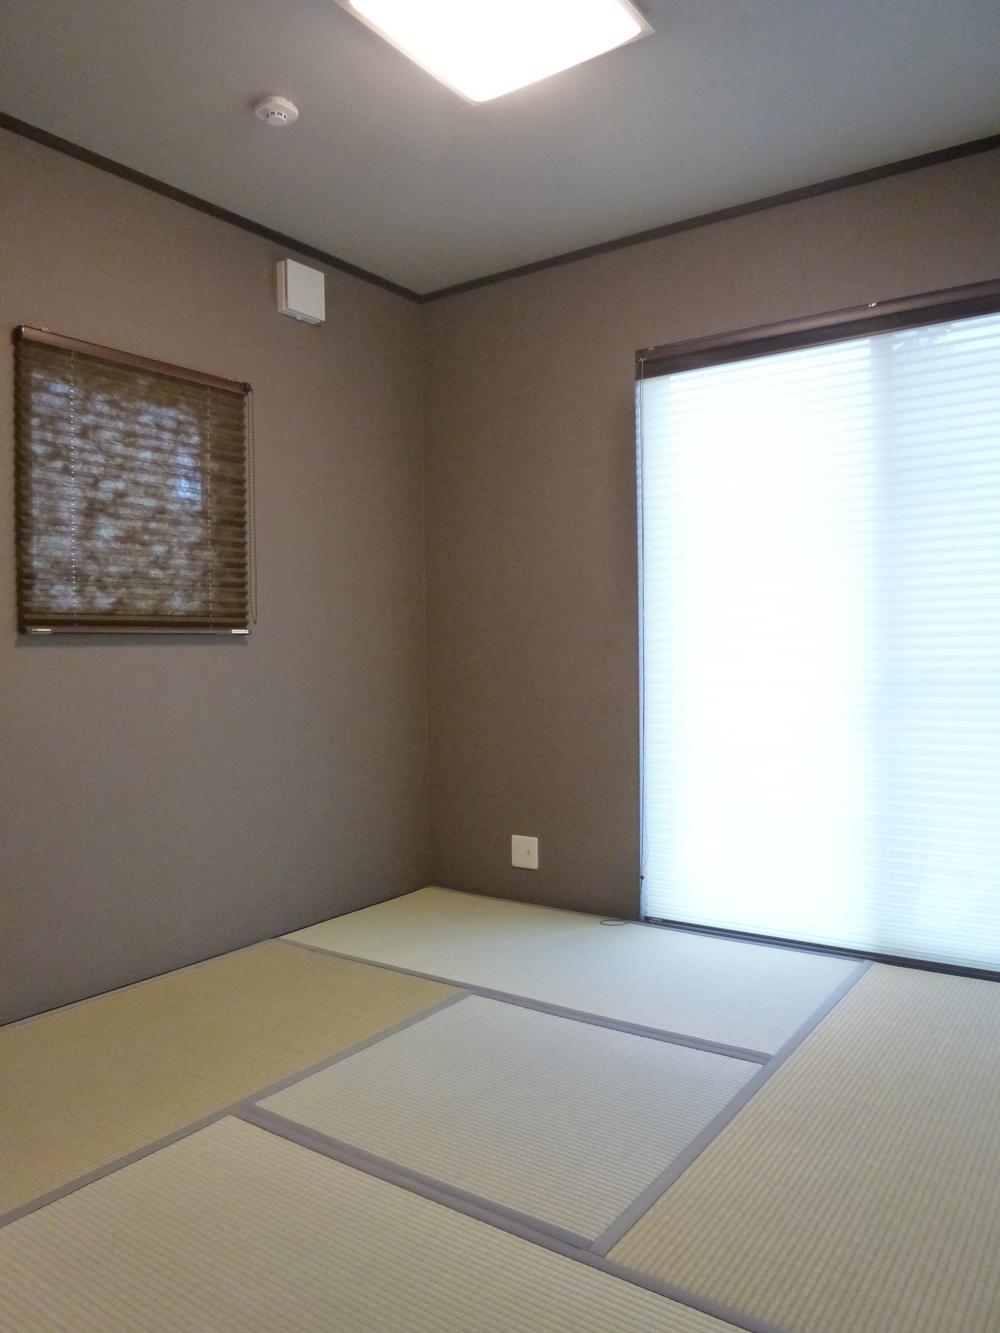 Other introspection. No. 2 place Japanese-style room (May 2013) Shooting